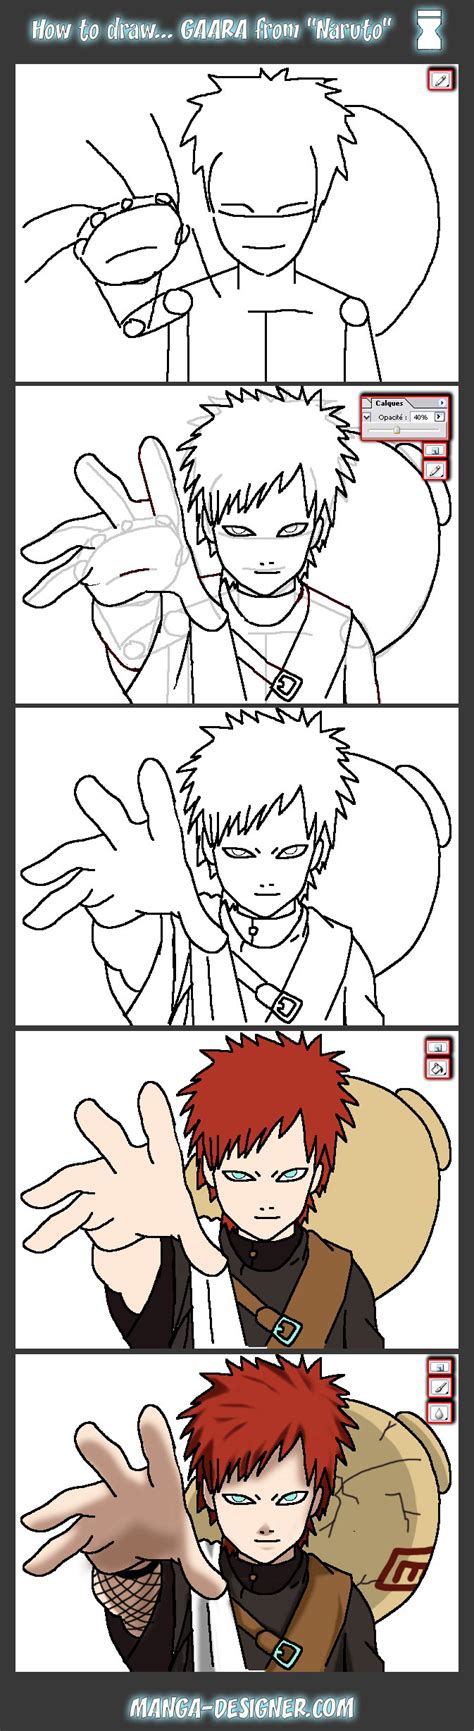 How To Draw Gaara By Blops On Deviantart